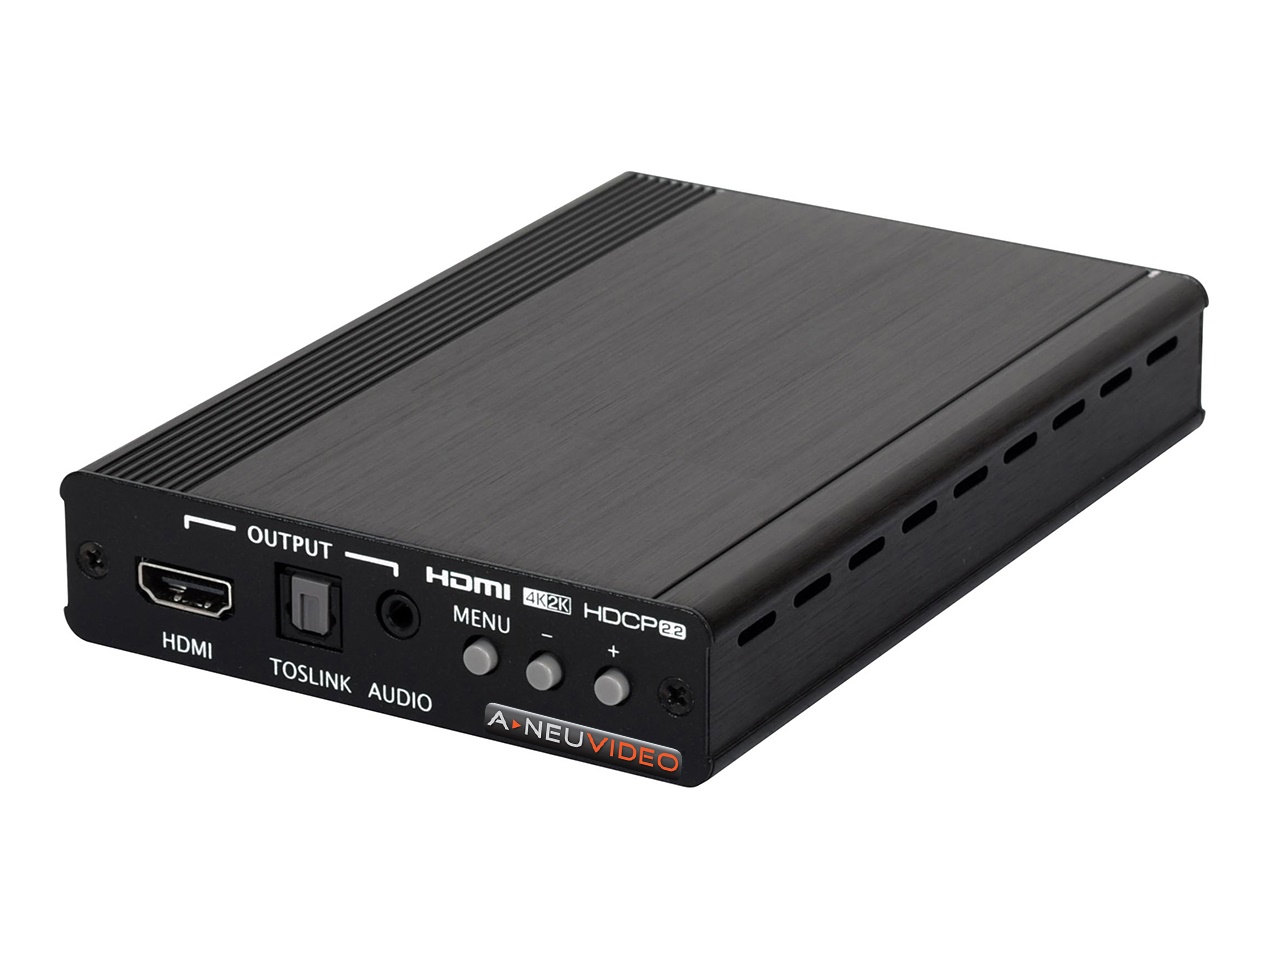 A-NeuVideo ANI-4KHPN 4K UHD/HDMI to HDMI Scaler with EDID Management